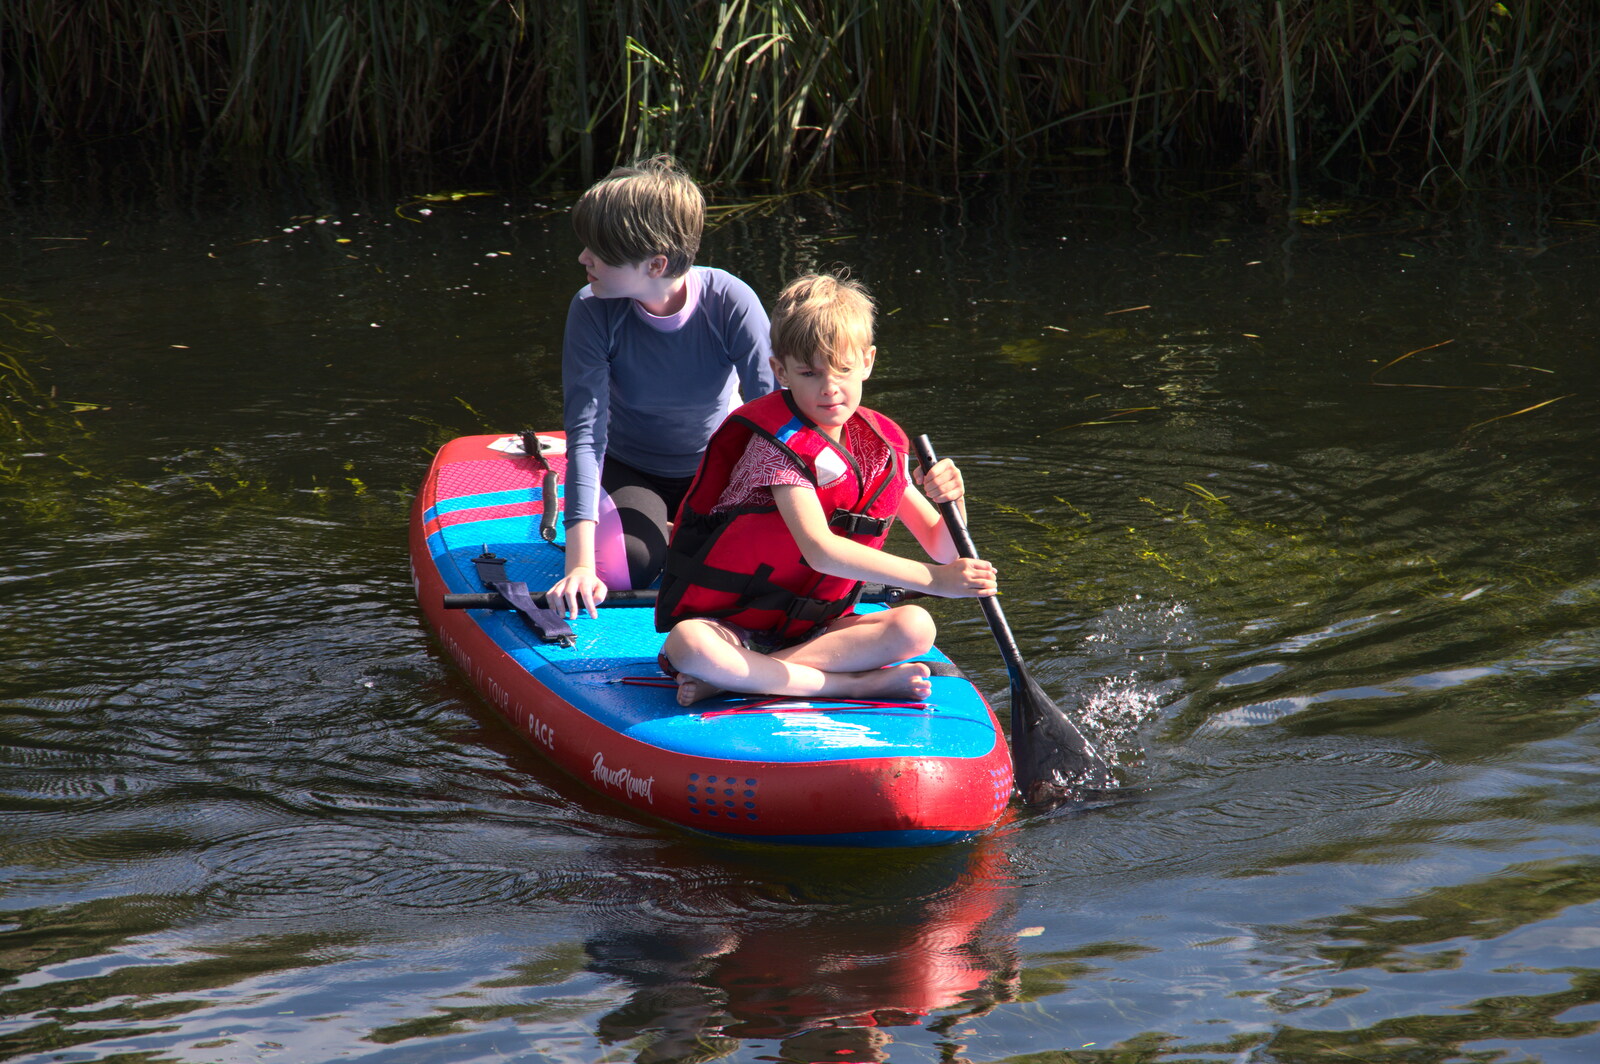 Camping at Three Rivers, Geldeston, Norfolk - 5th September 2020: Harry paddles around with Lydia